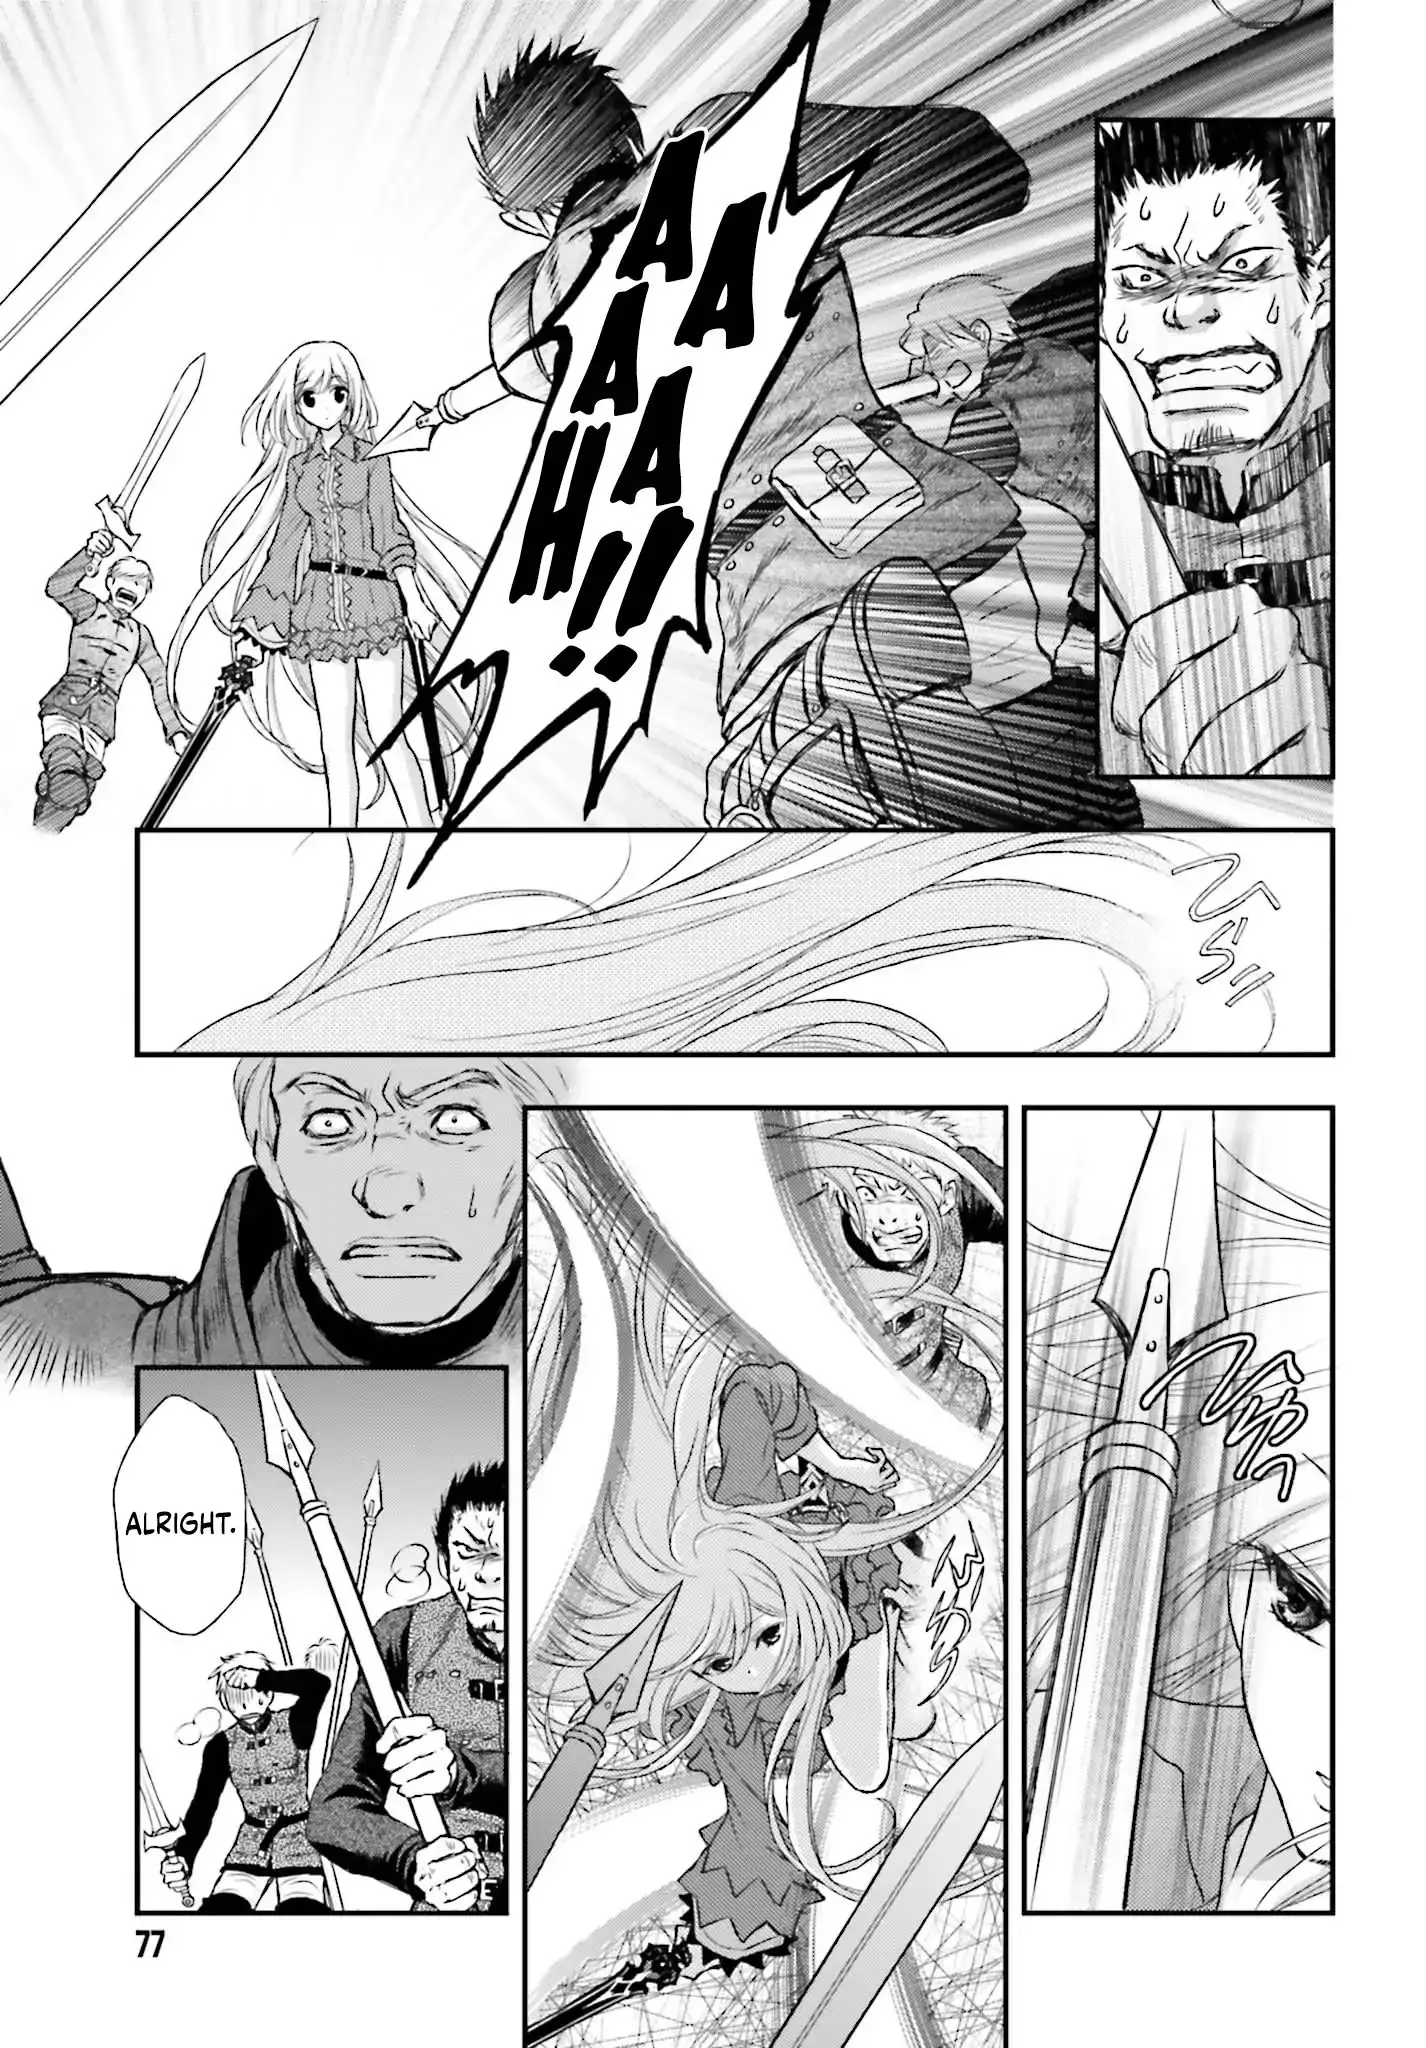 The Little Girl Raised By Death Hold The Sword Of Death Tight - 1 page 14